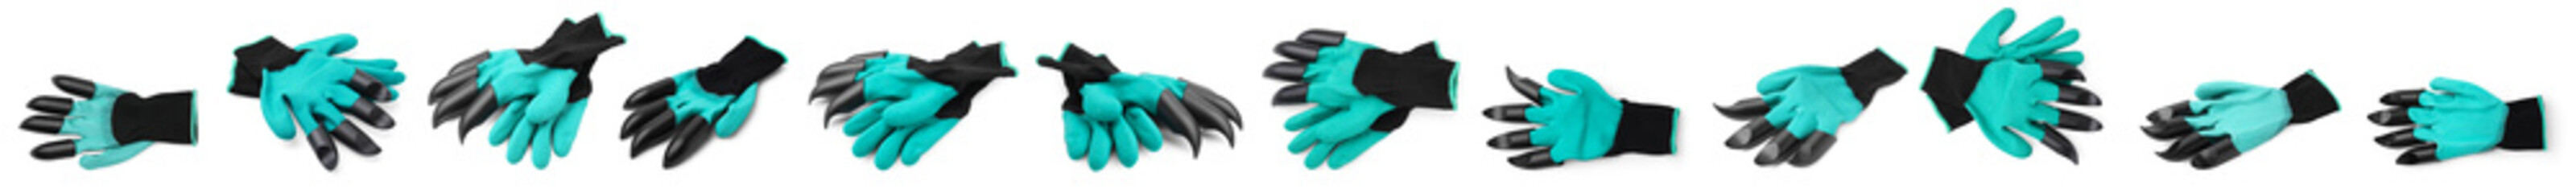 Gardening gloves with claws isolated on white, set